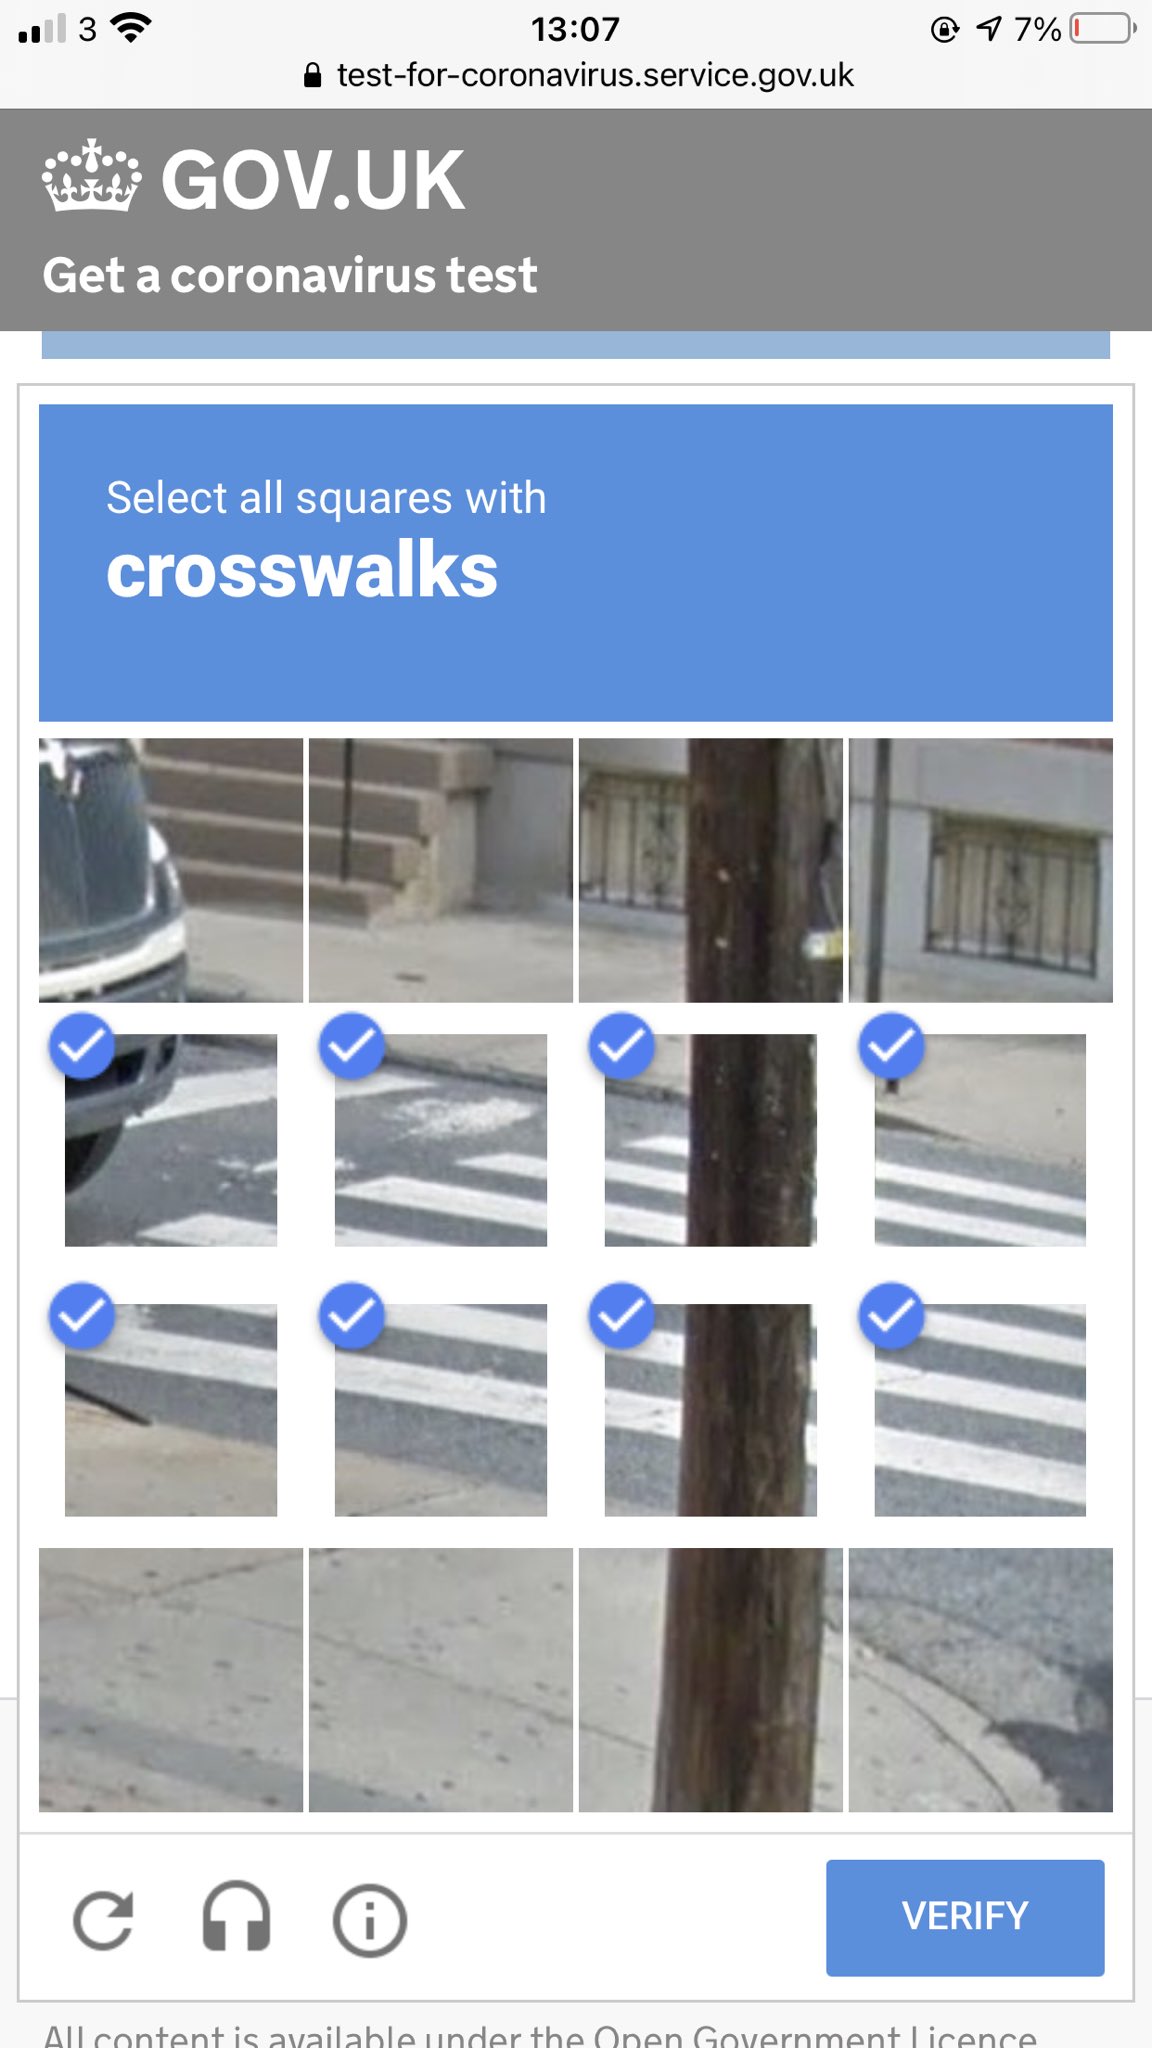 Gov.uk’s “get a coronavirus test” page using Google’s reCAPTCHA asking for the site visitor to identify “crosswalks“.